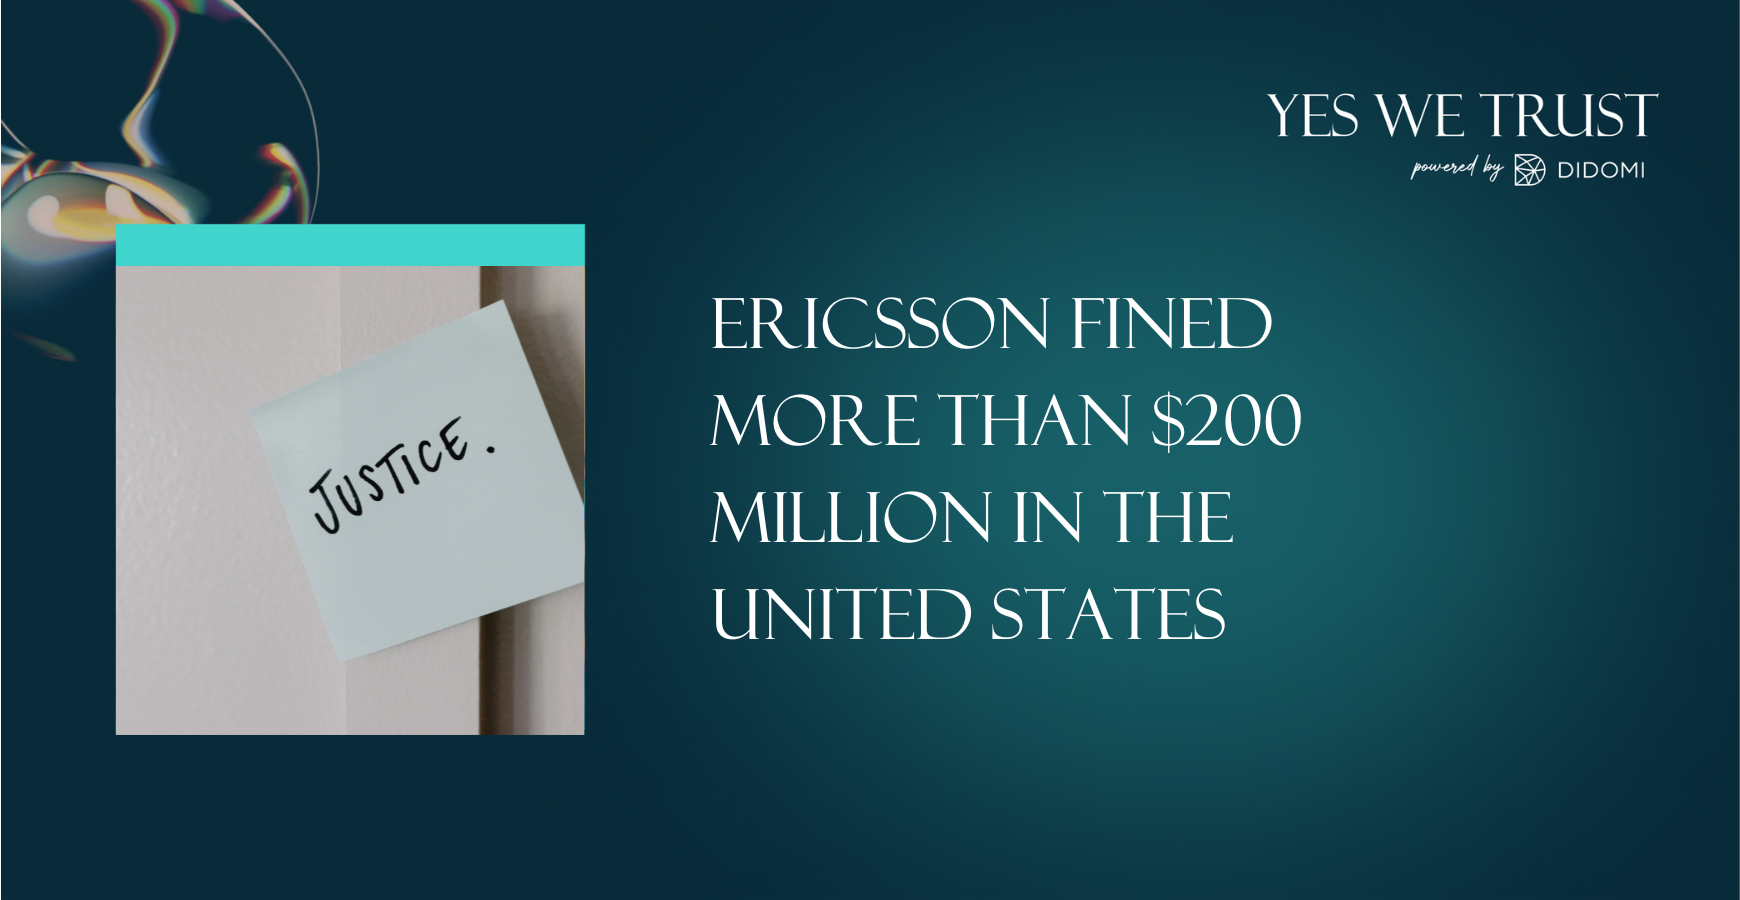 Ericsson Fined More Than $200 Million In The United States